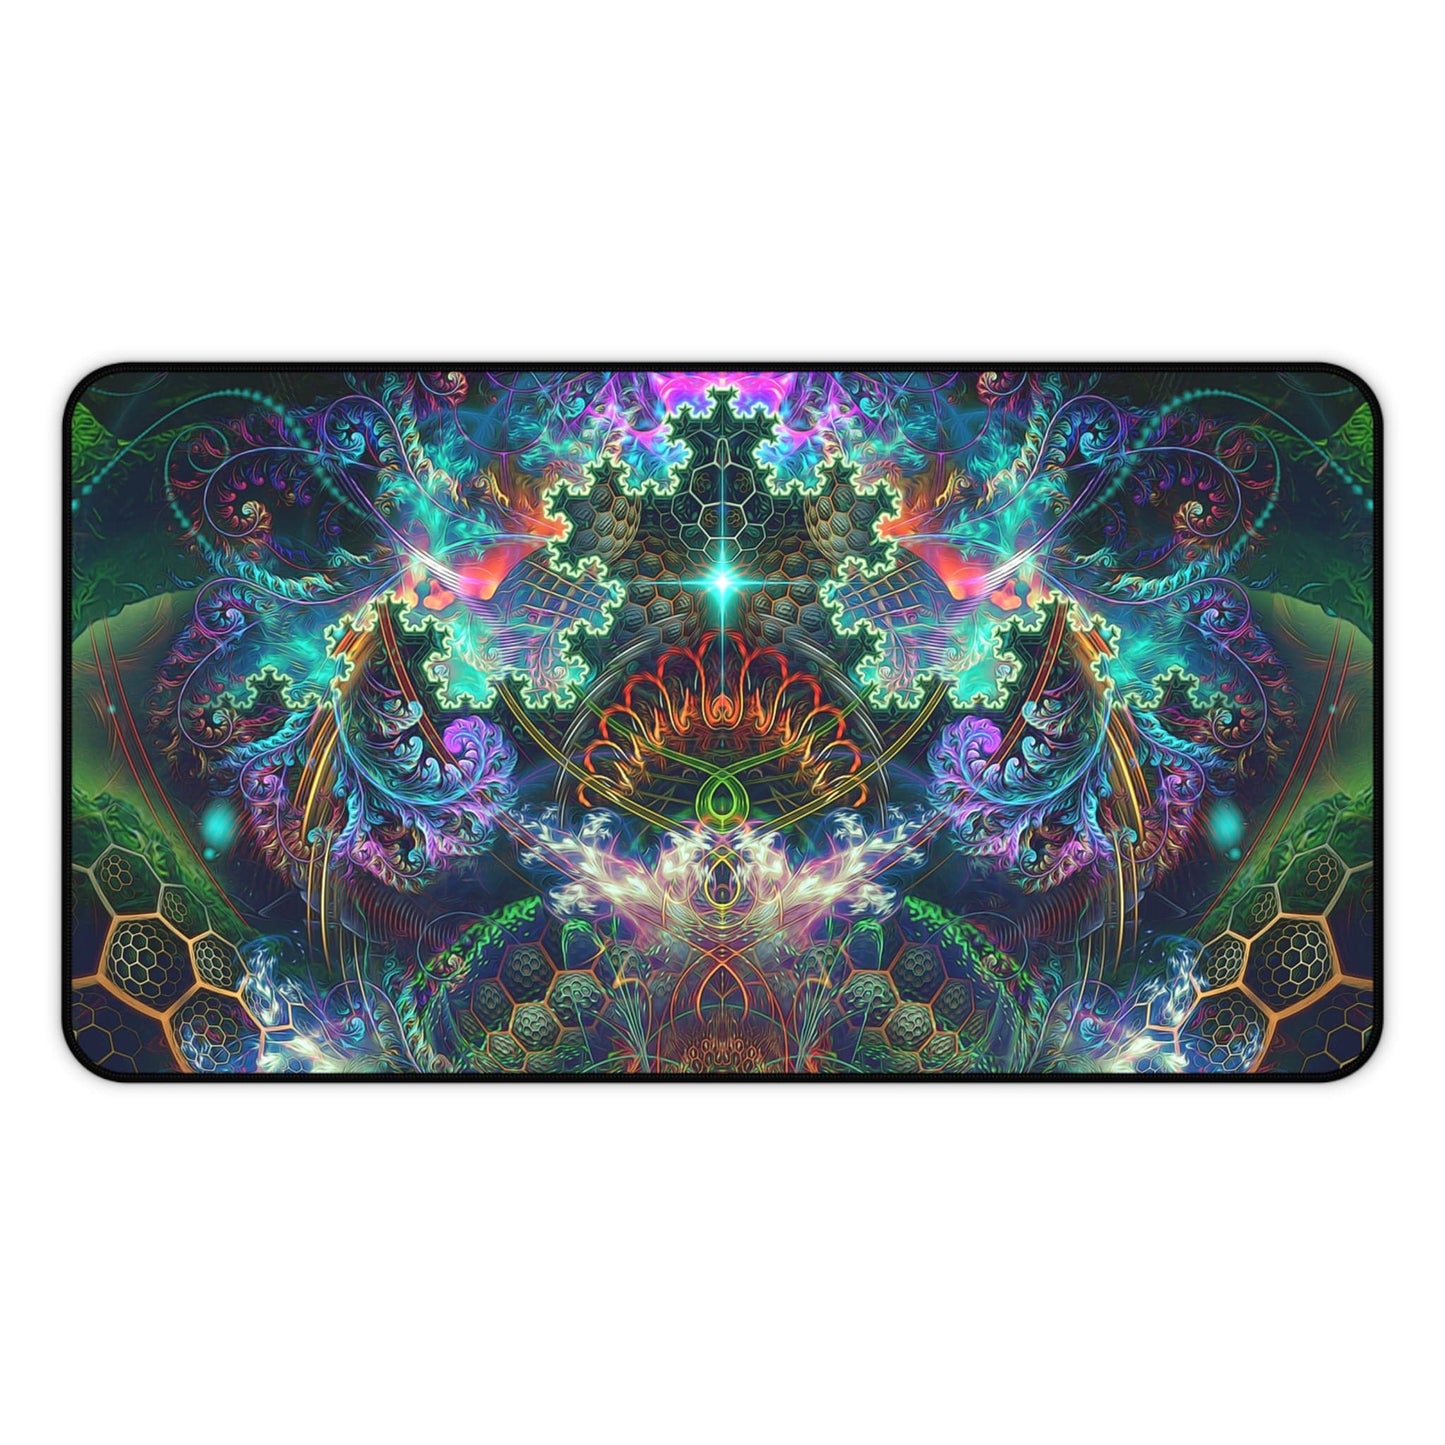 "To Tree or Not to Tree - [Top Section]" DESK MAT / MOUSE PAD (12x18)(12x22)(15.5x31)